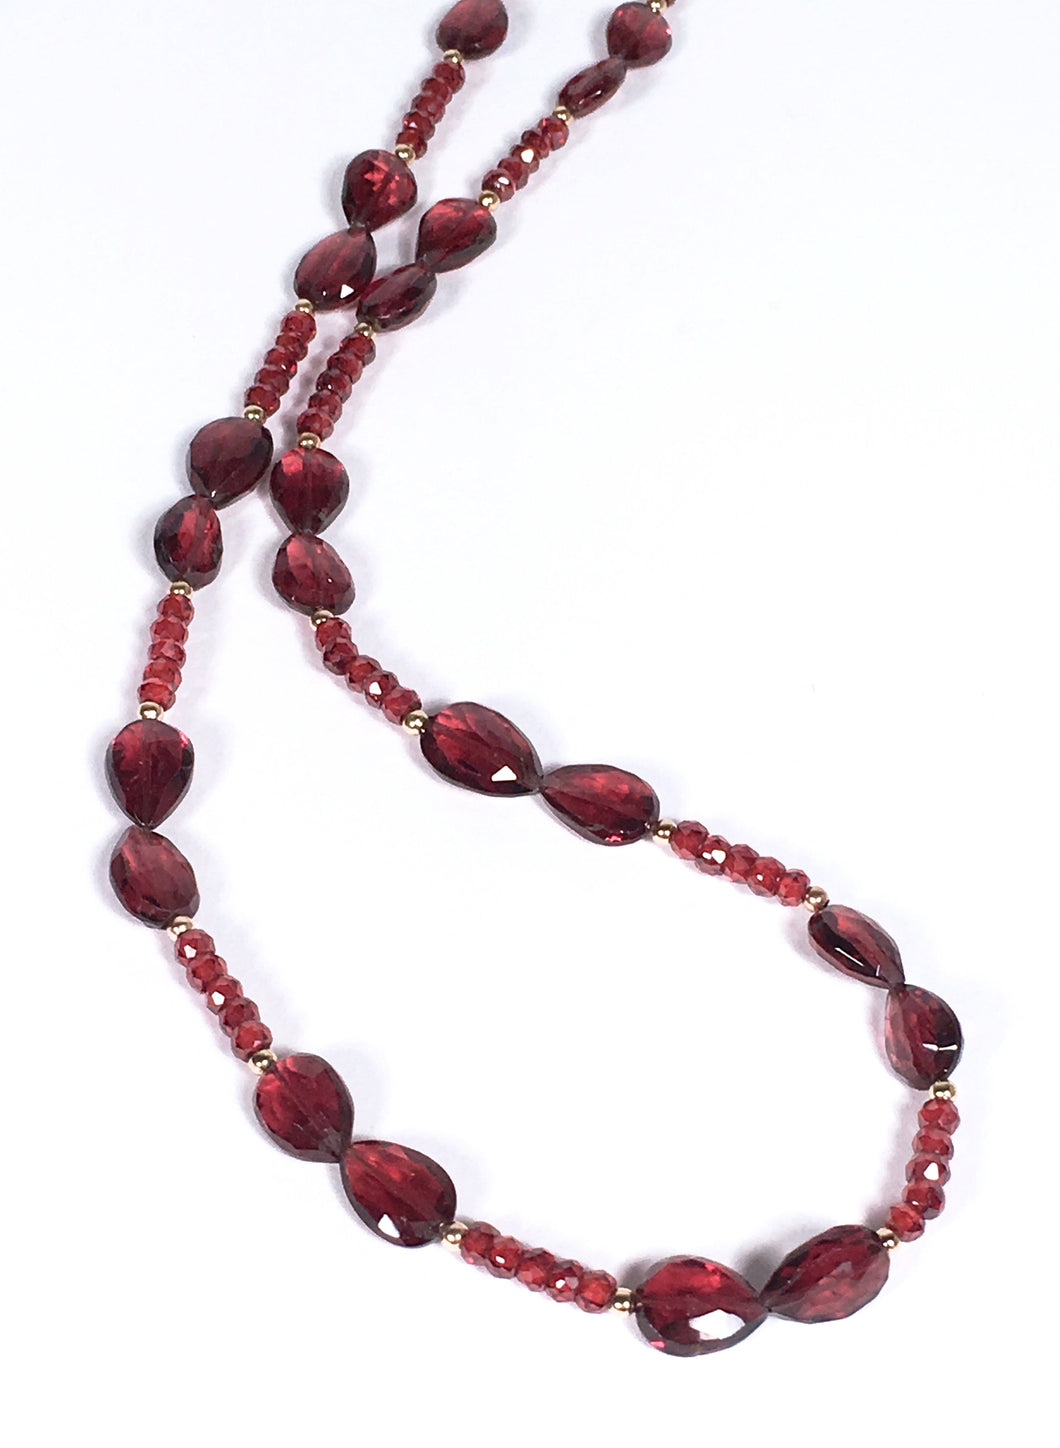 Faceted Garnet Necklace - This Season's Most Popular Color!